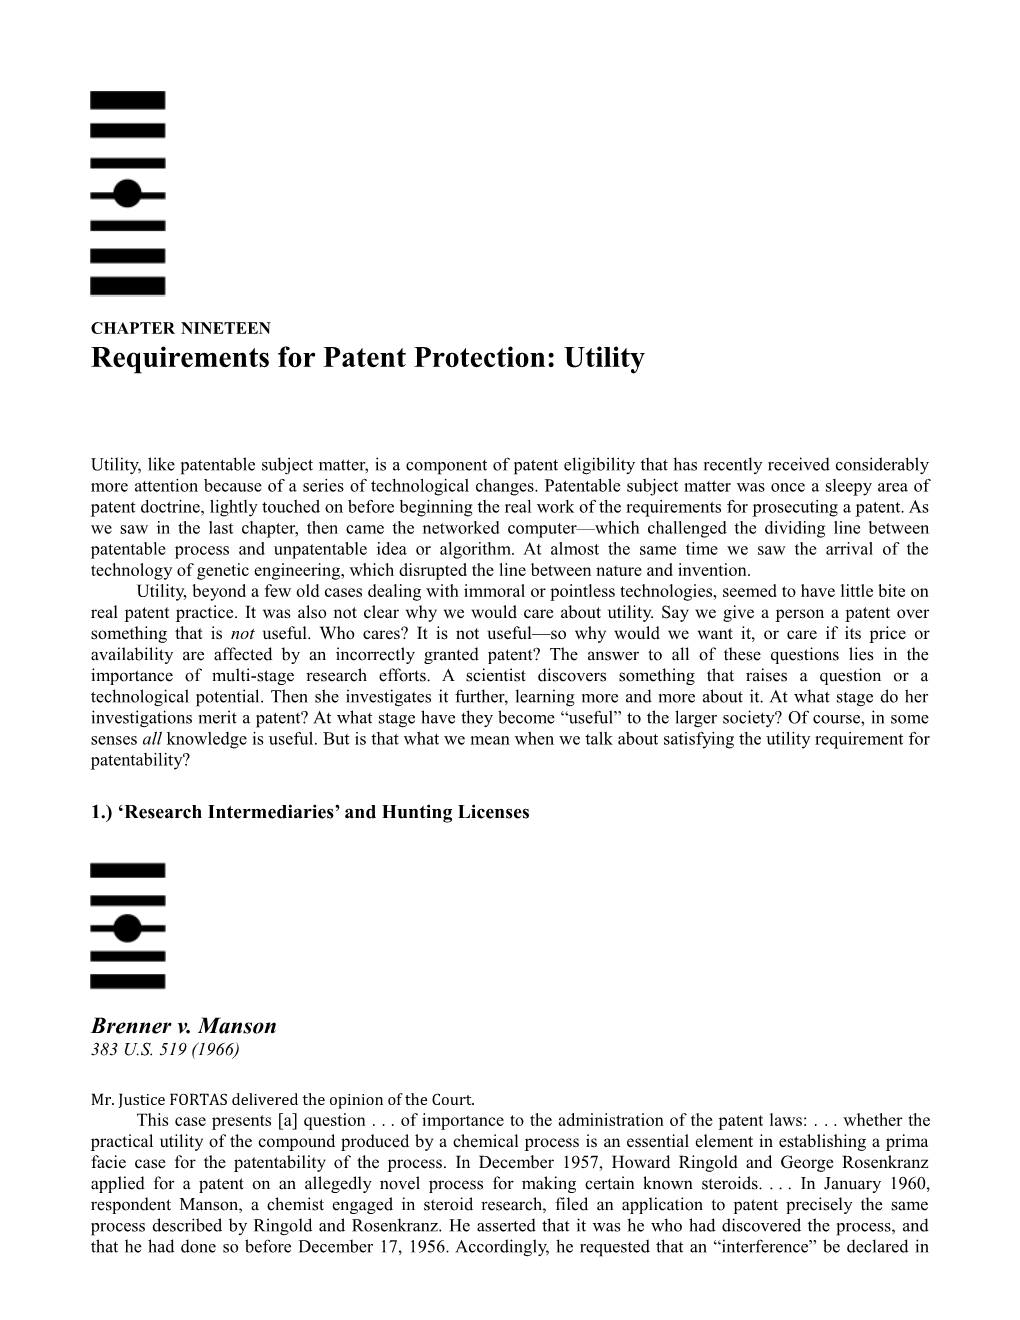 Requirements for Patent Protection: Utility